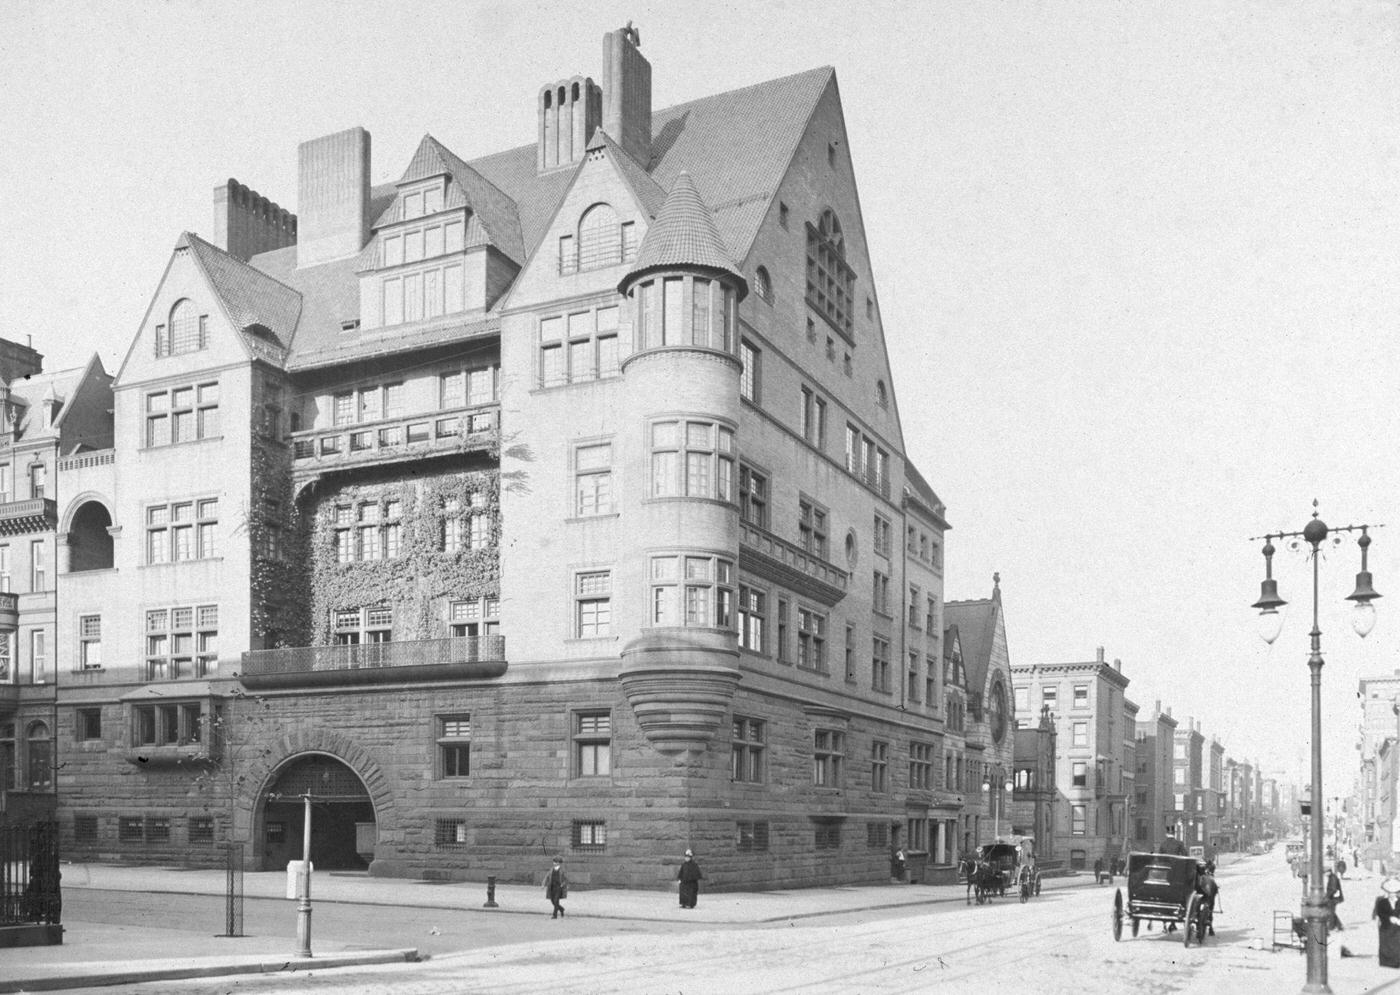 Tiffany House, Mansion On Madison Avenue And 72Nd Street, Built By Stanford White For Louis Comfort Tiffany, Manhattan, New York City, 1900